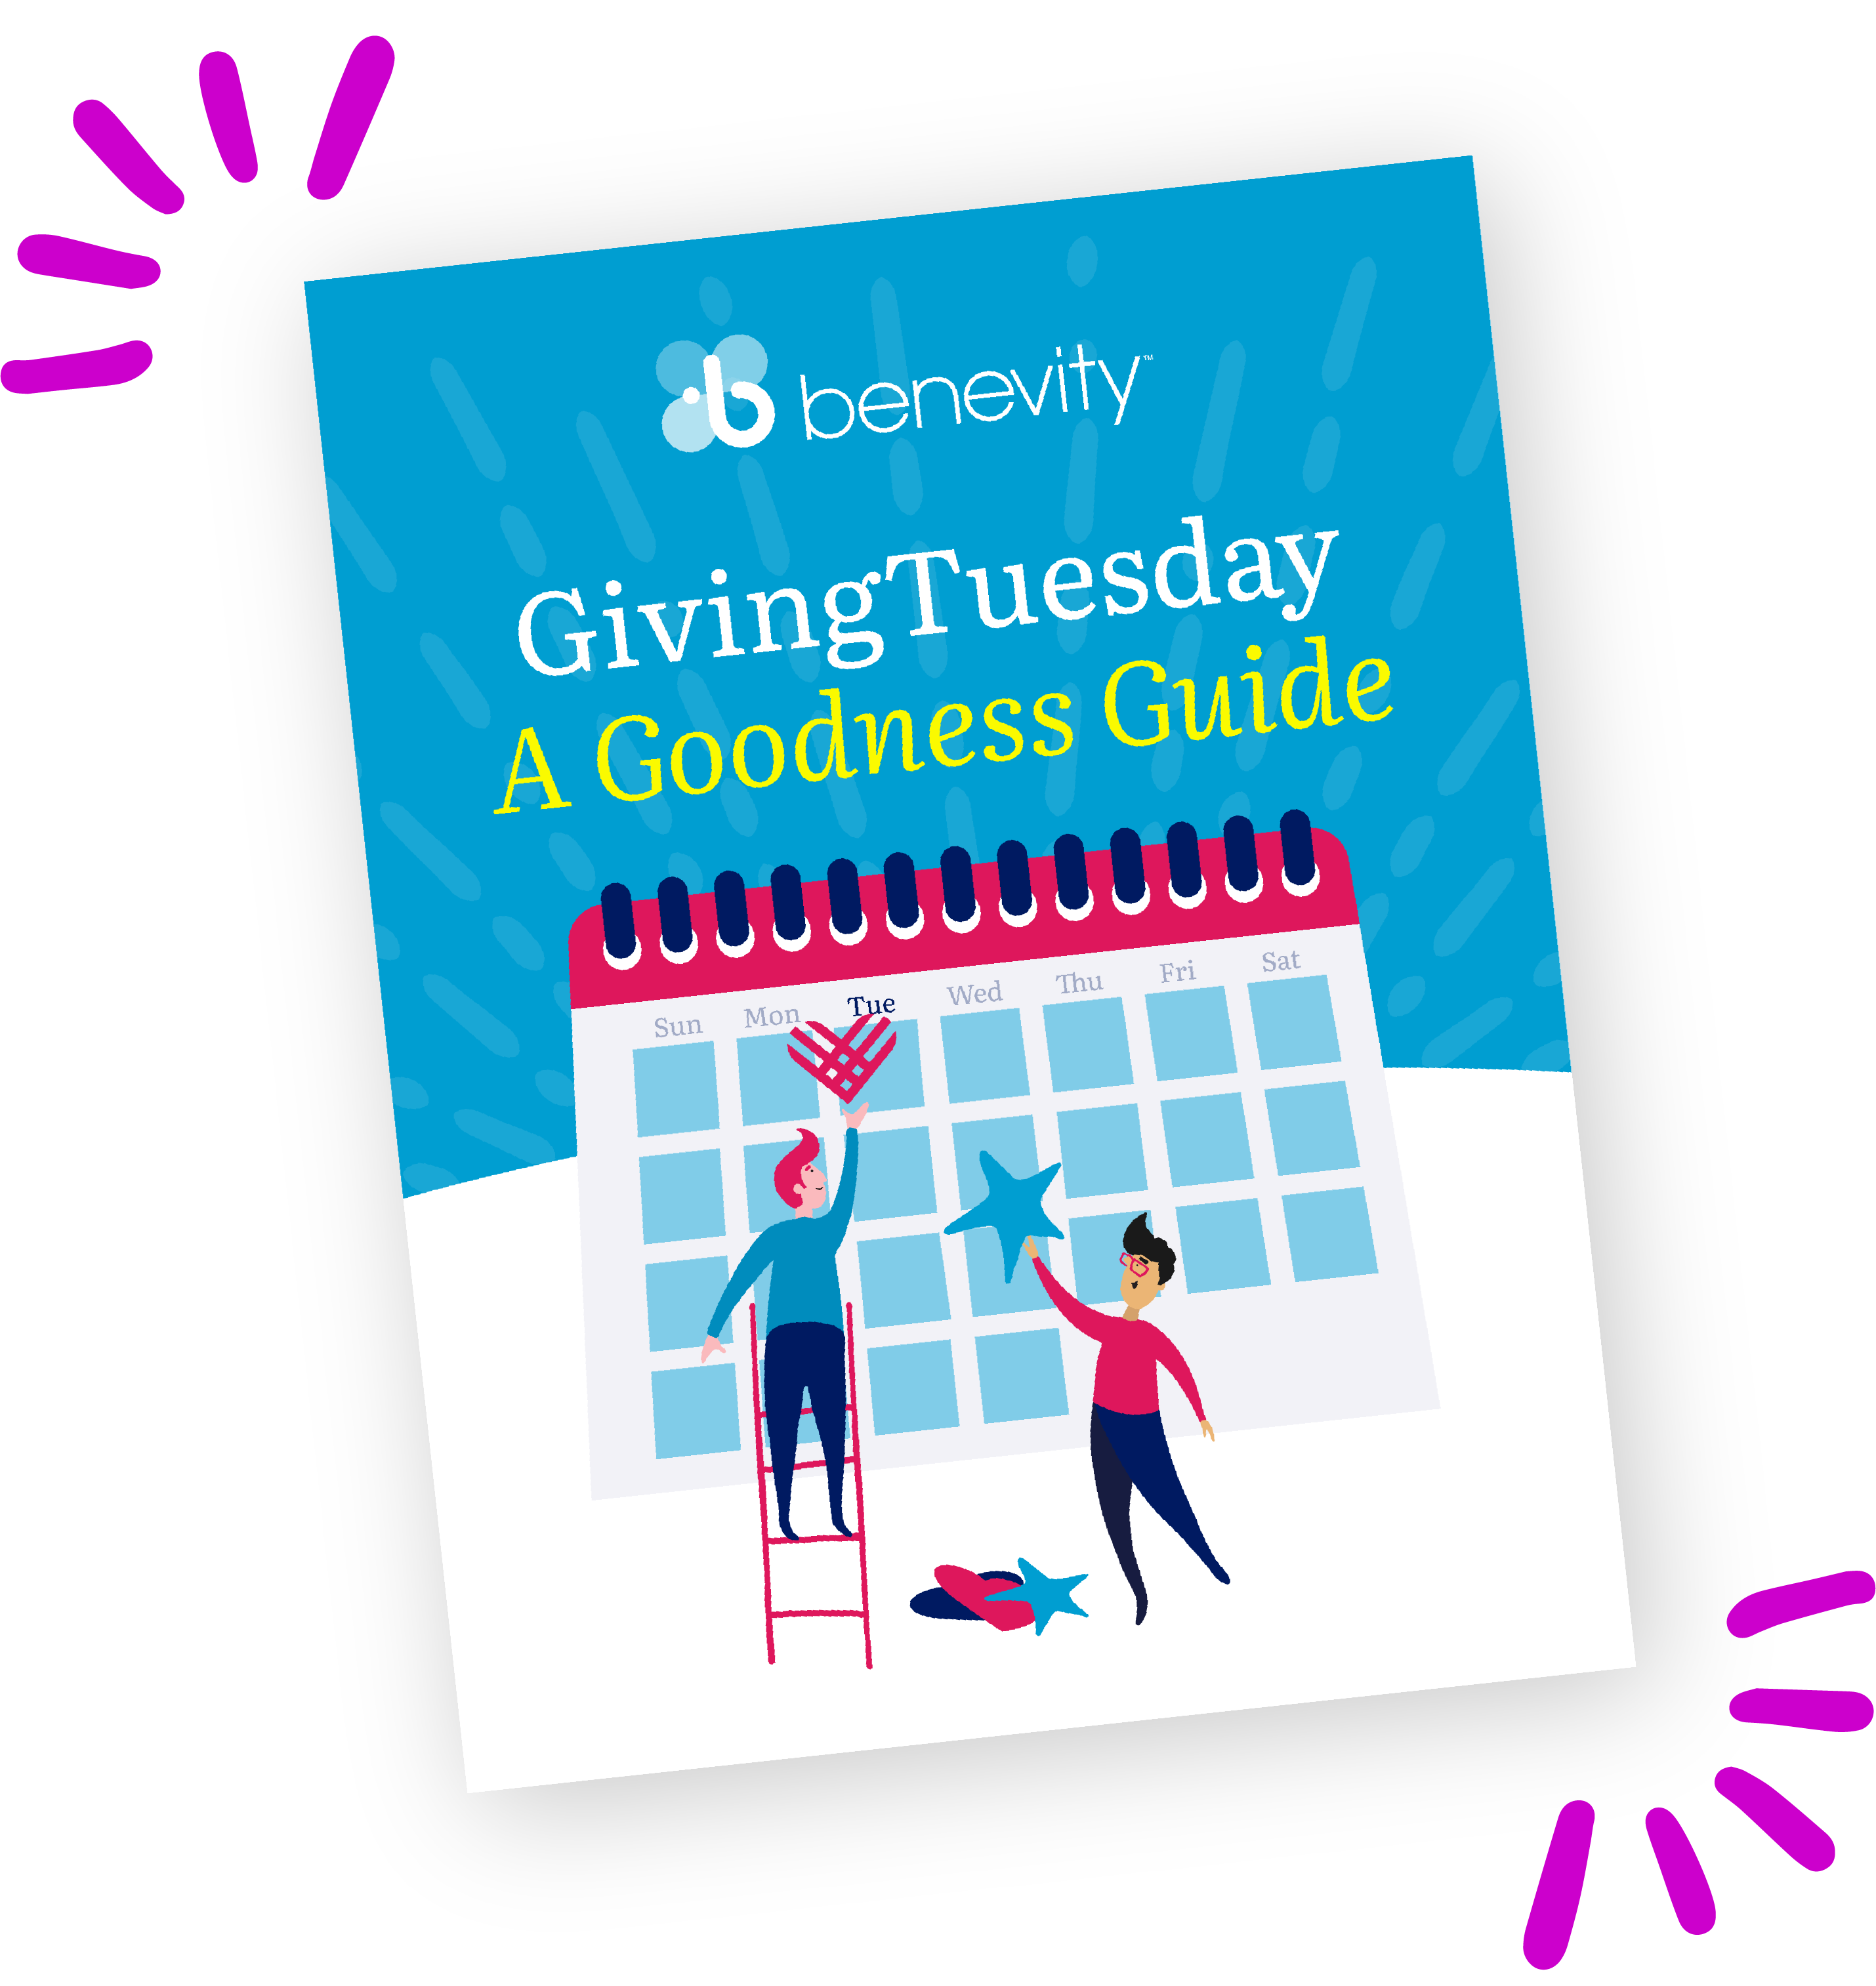 A Goodness Guide For Giving Tuesday